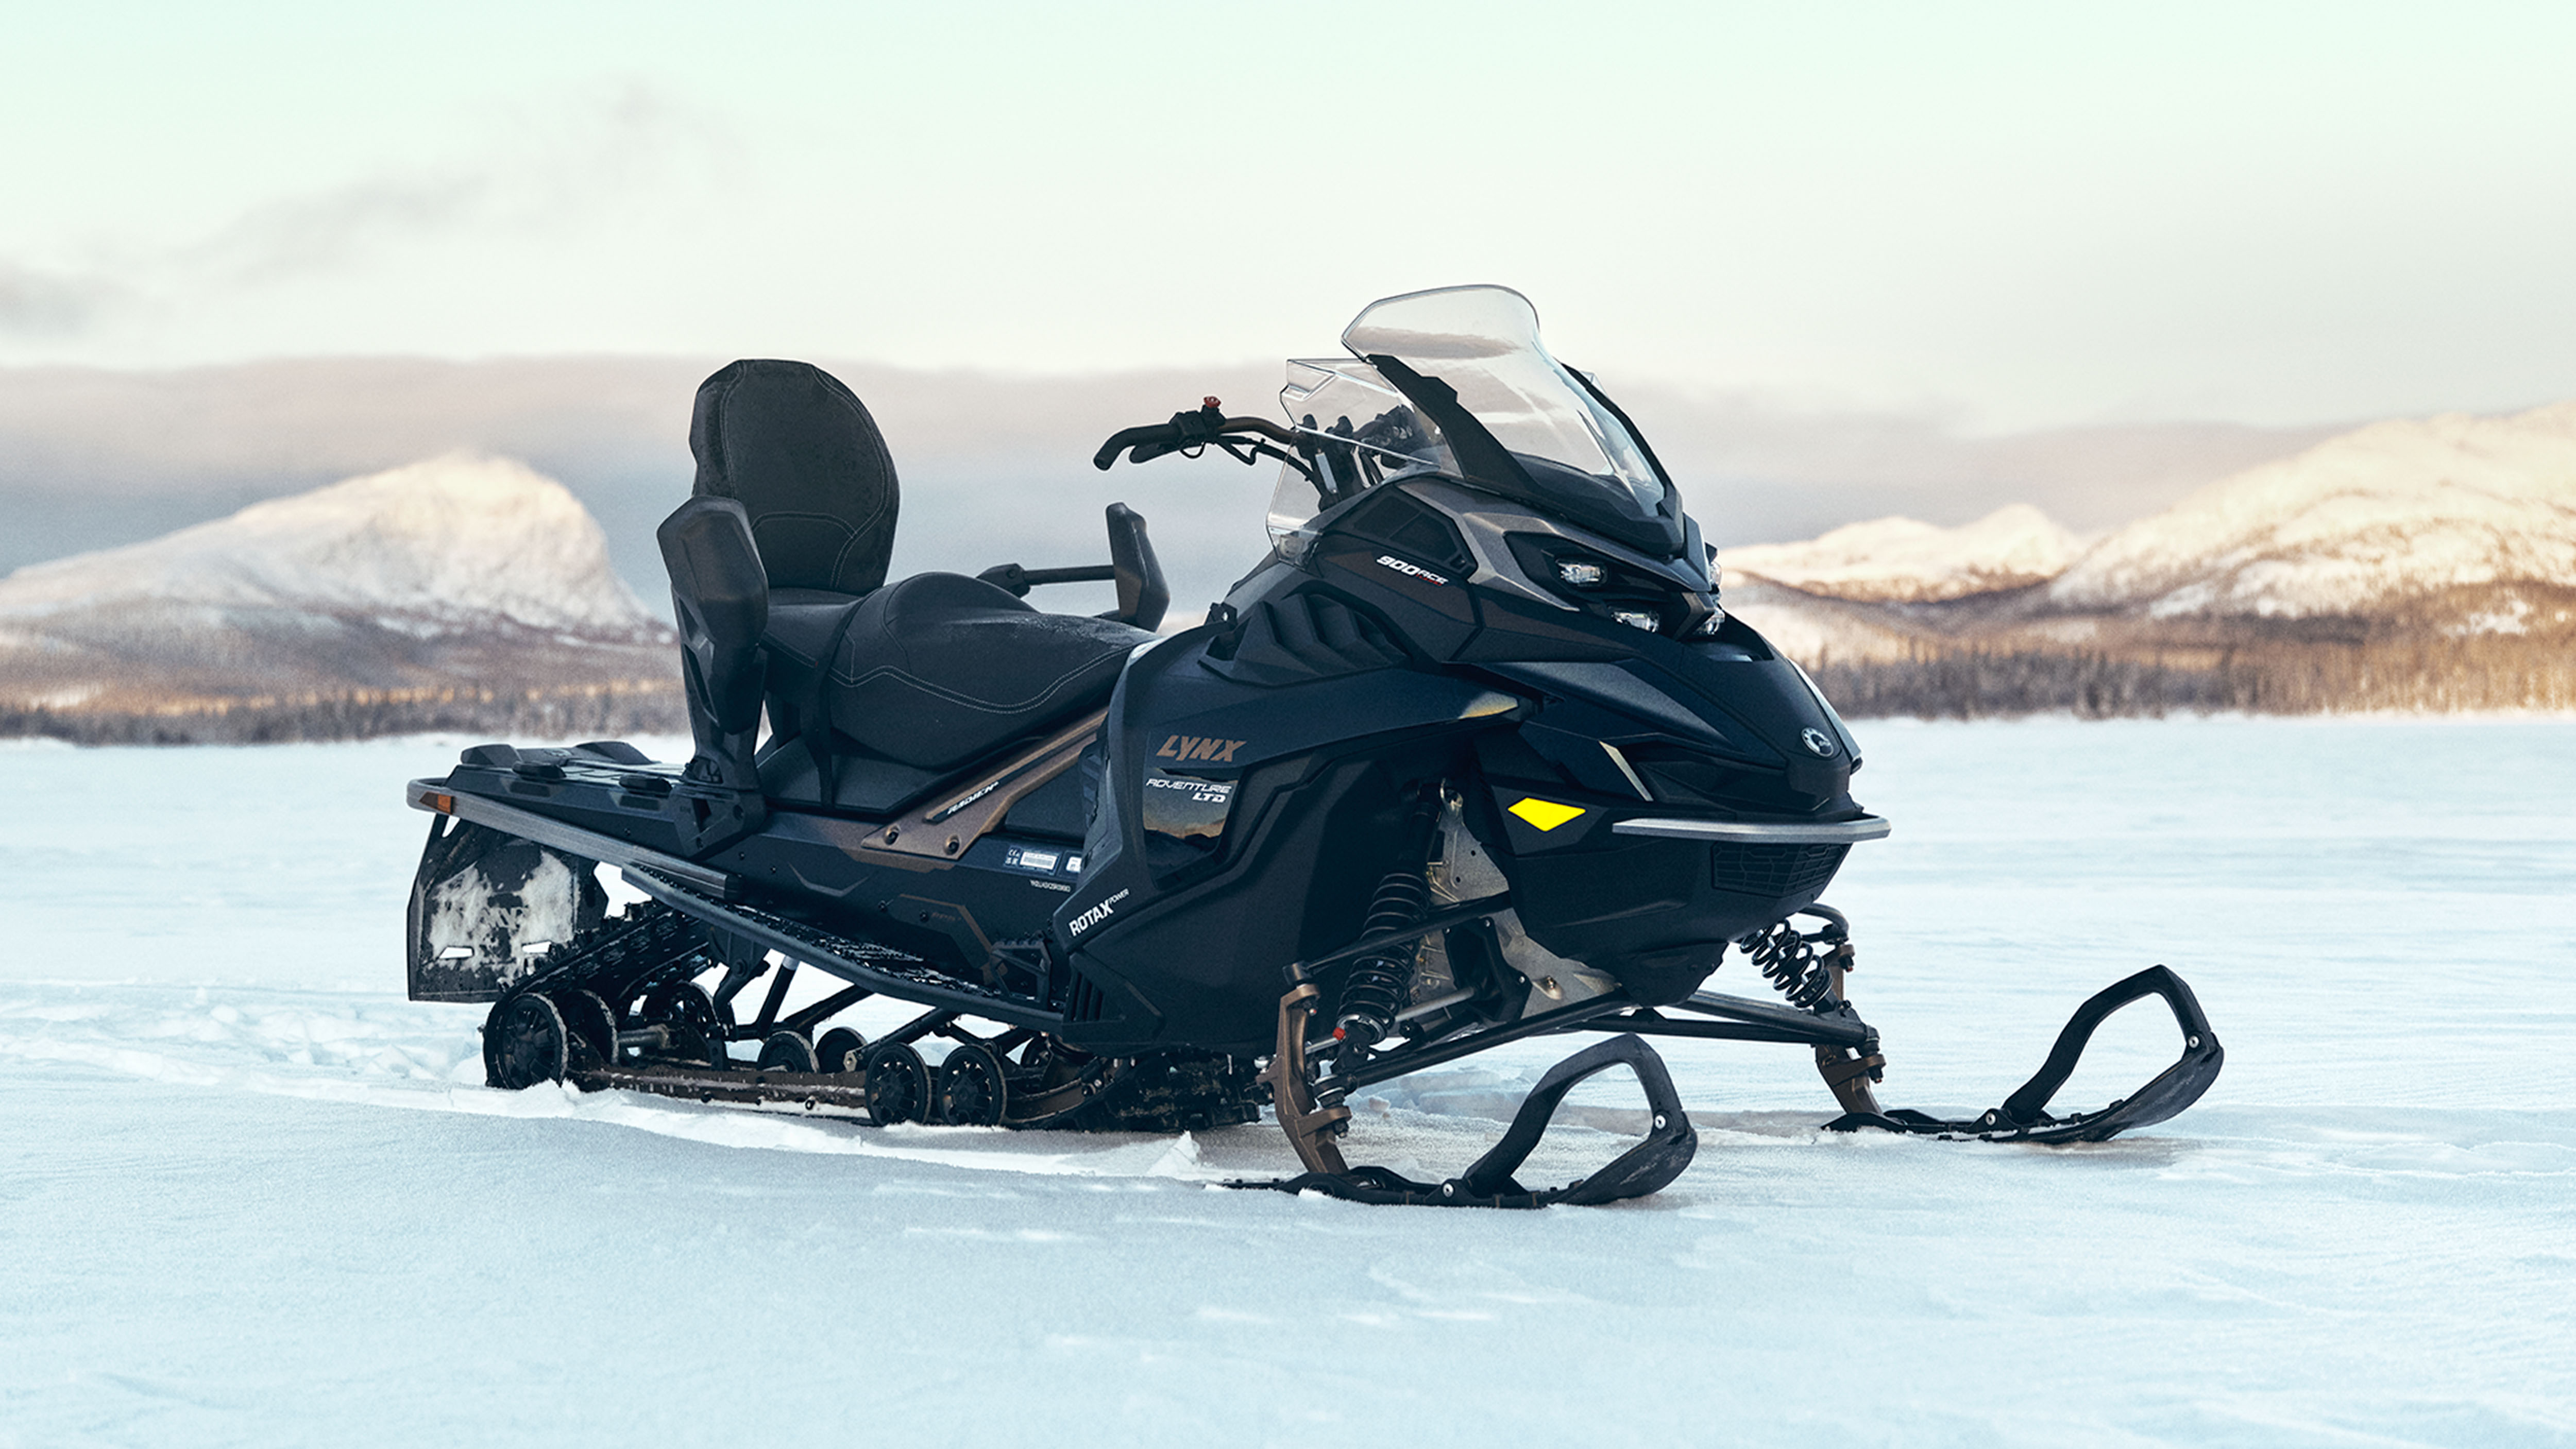 Lynx Adventure Limited 2025 snowmobile with Passenger Kit on lake ice